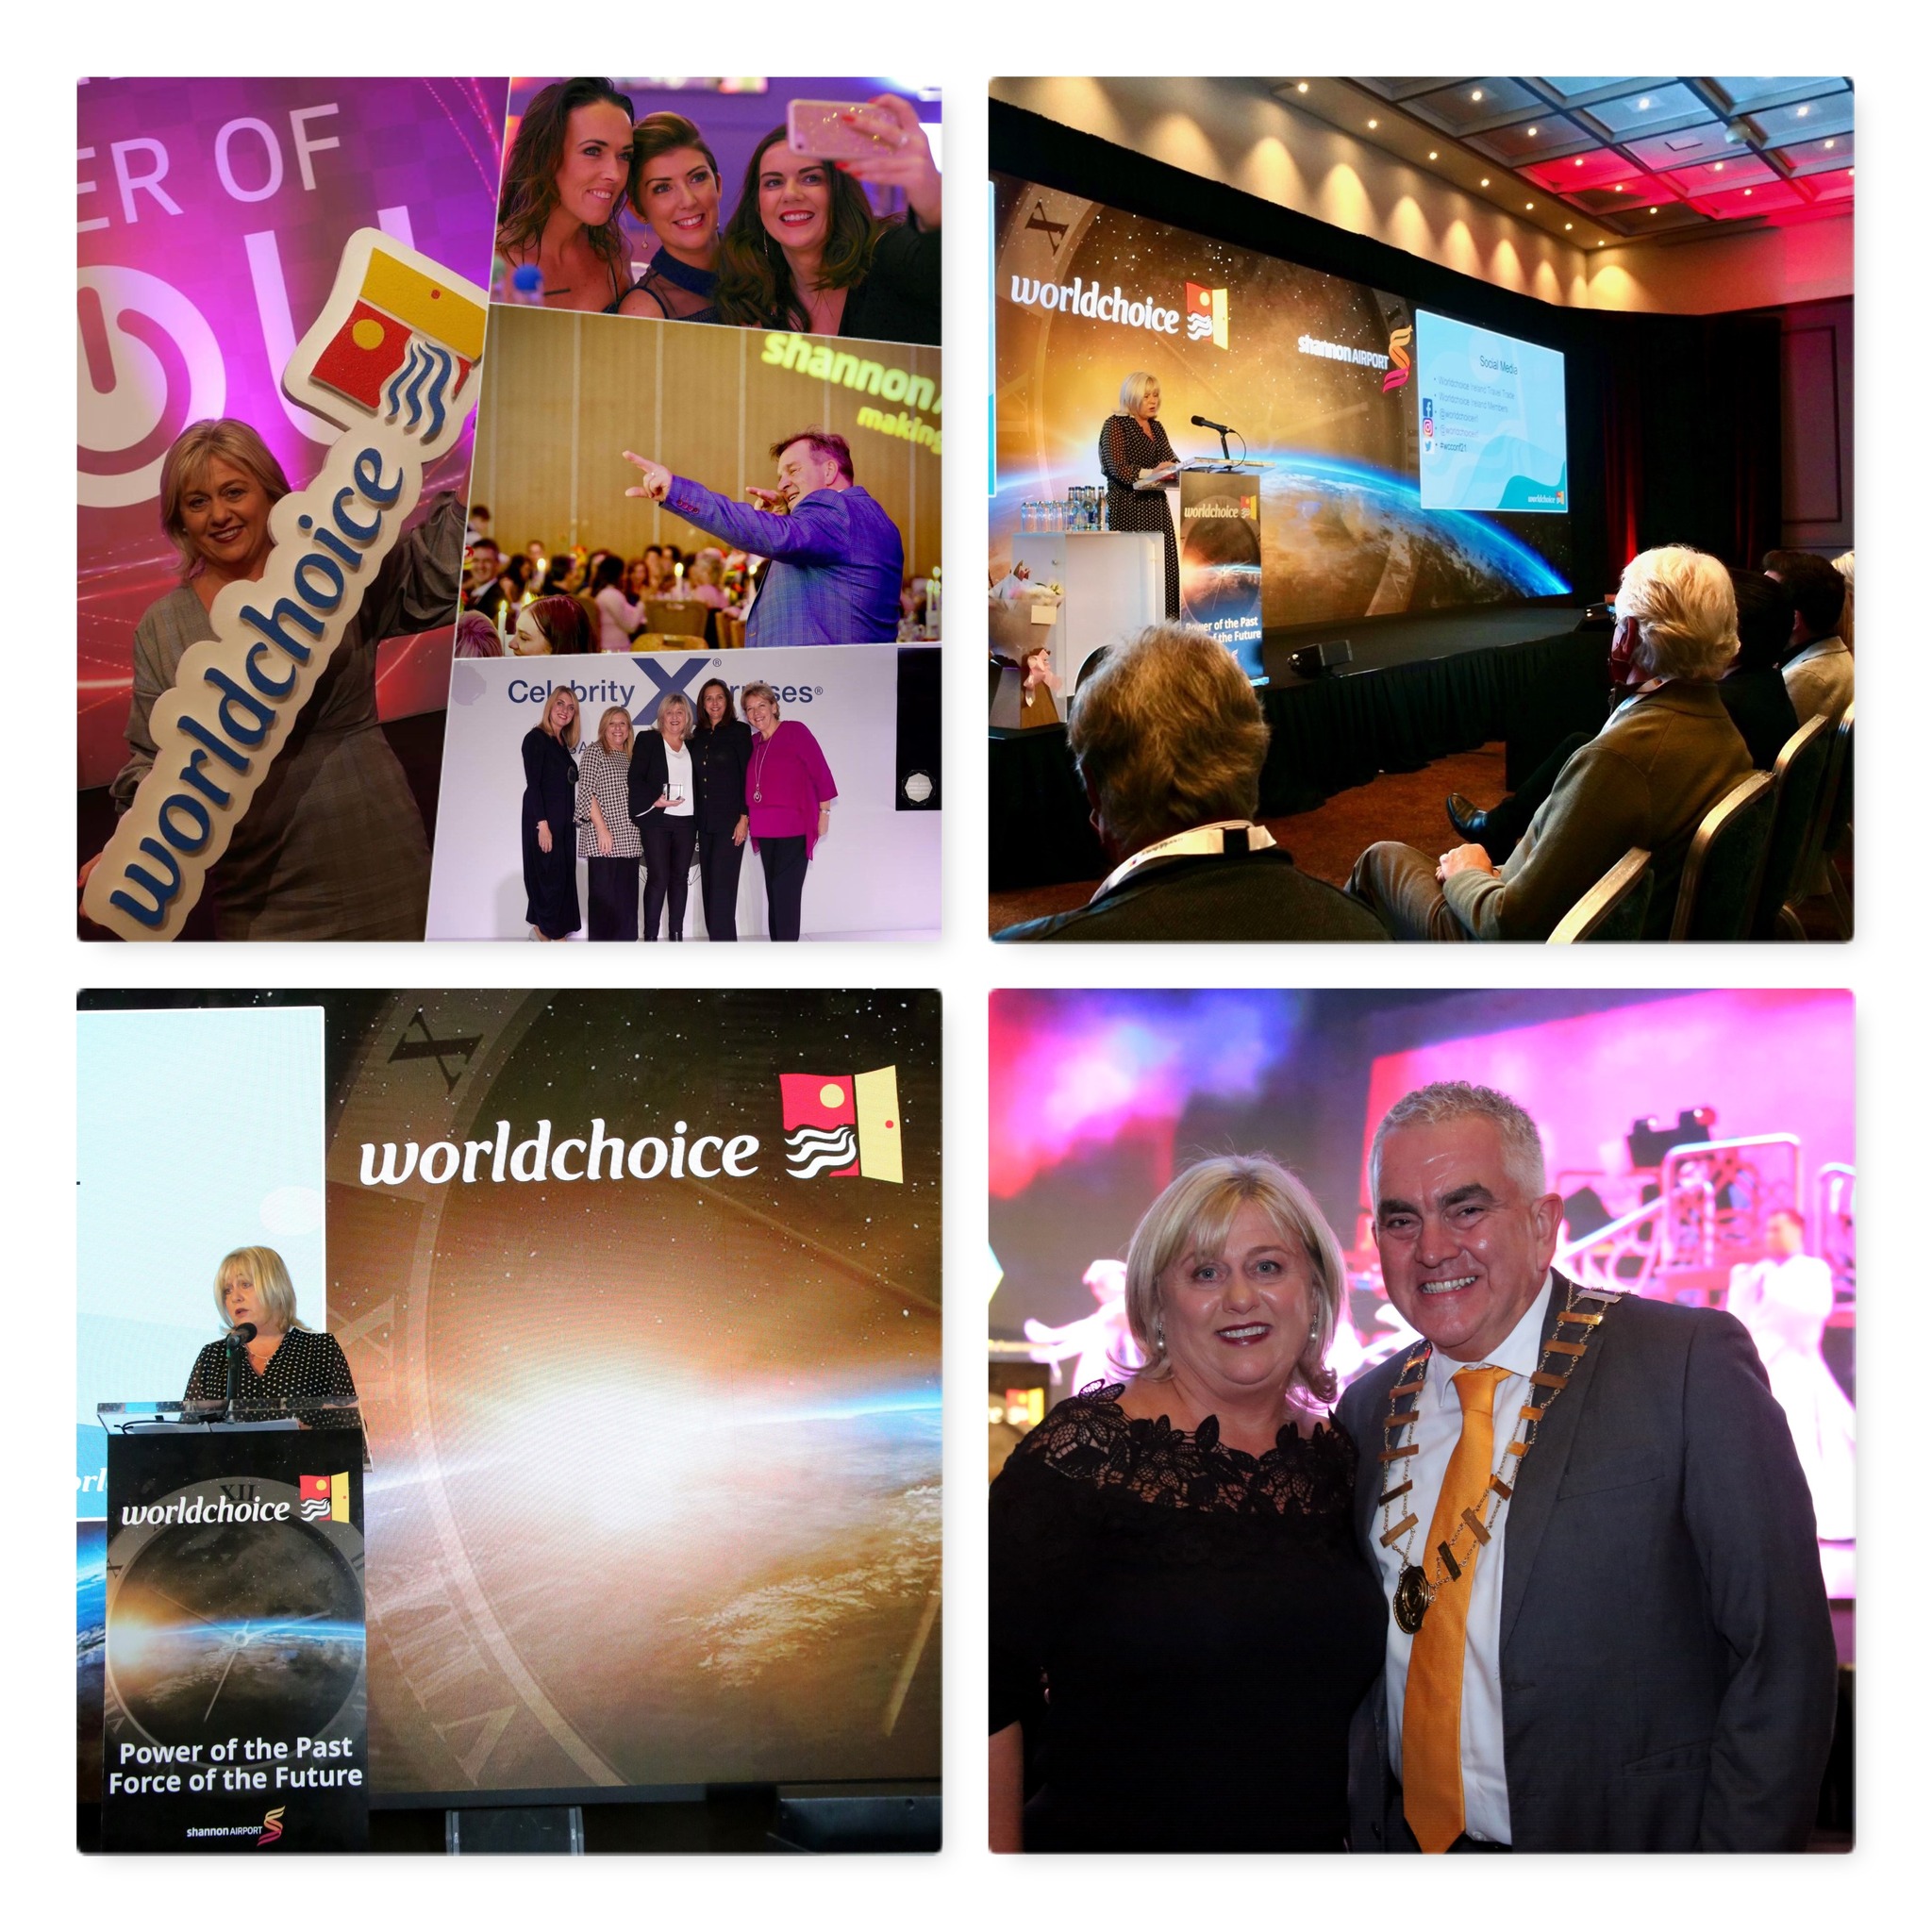 Worldchoice confirm Venue and dates for their 2022 Conference